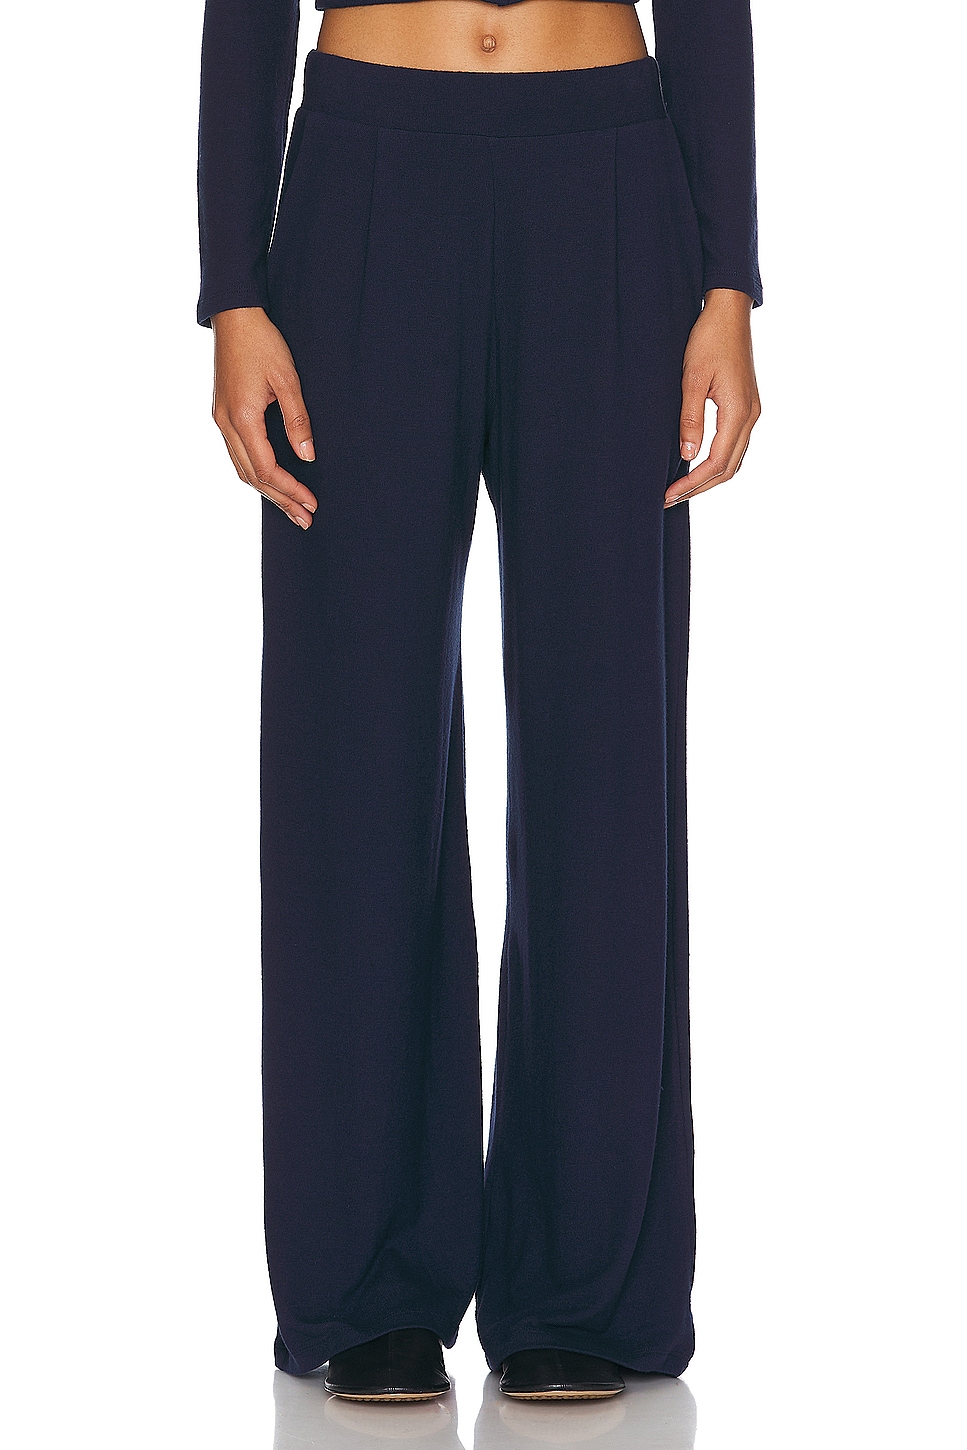 Image 1 of LESET Lauren Pleated Pocket Pant in Navy